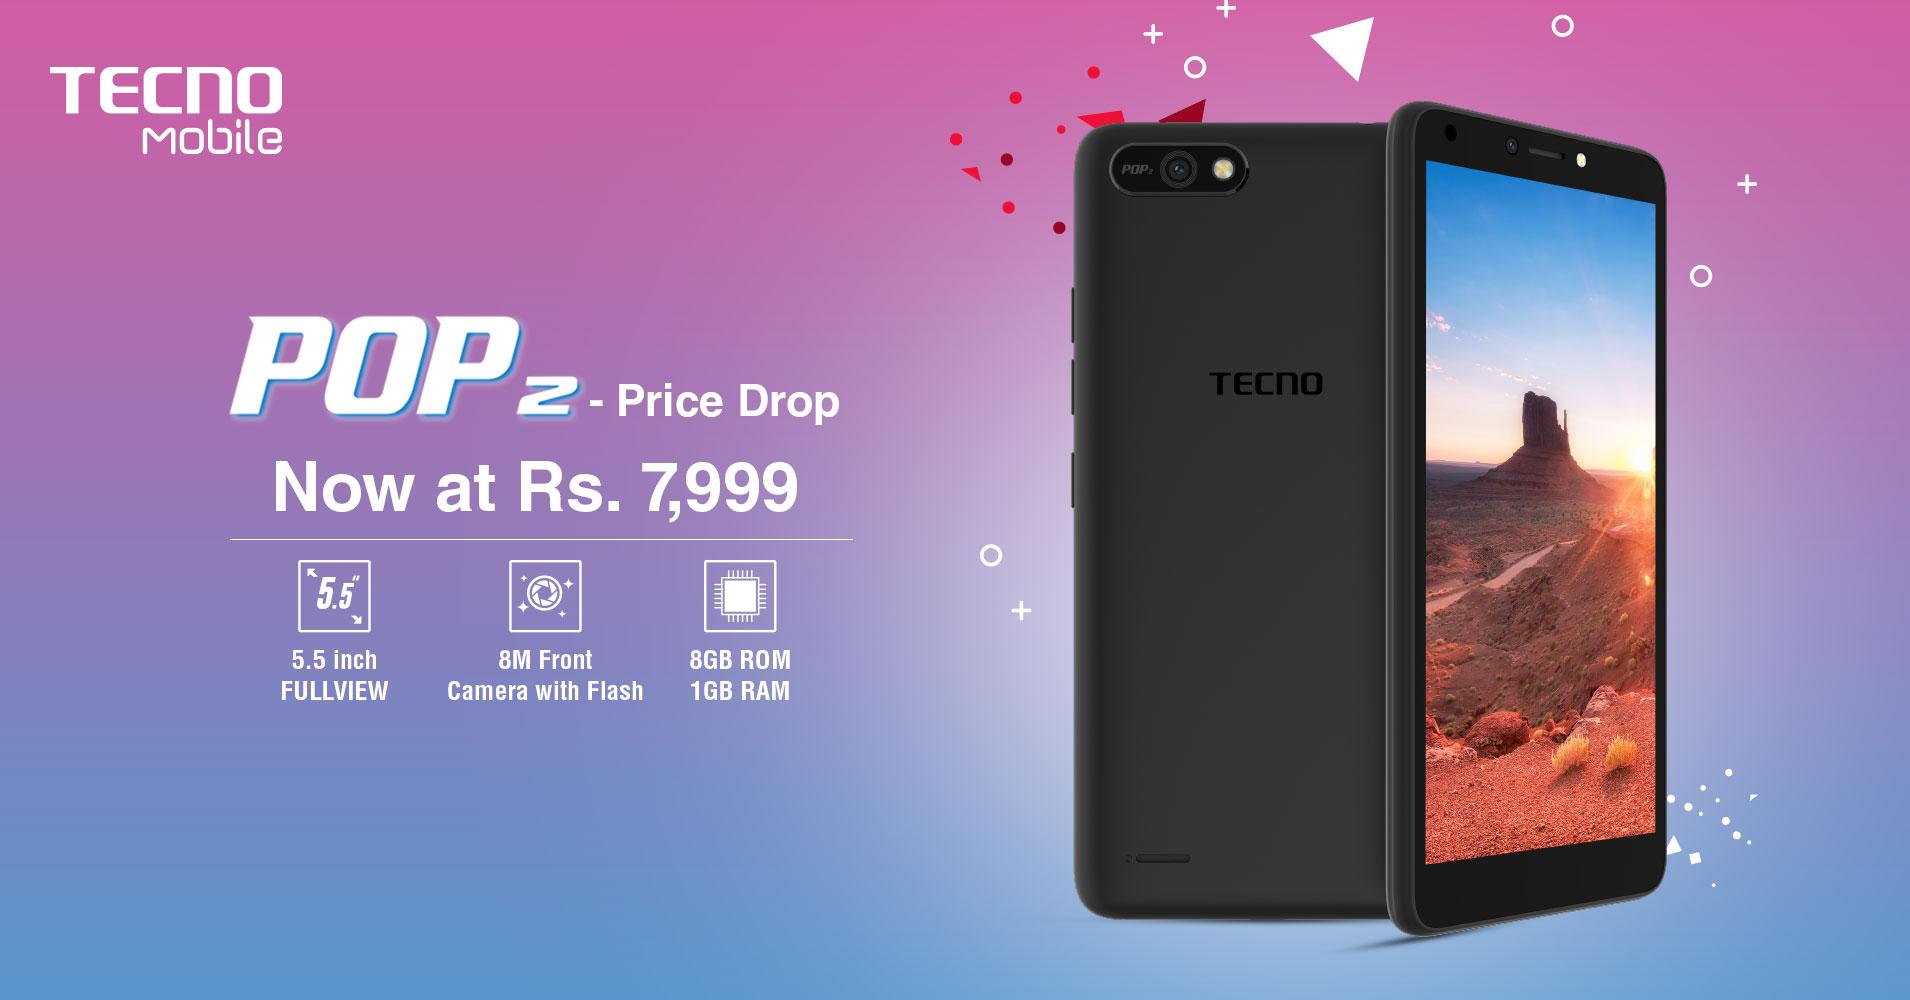 TECNO Mobile Has Reduced The Price Of Its Most Famous Budget Smartphone Pop 2